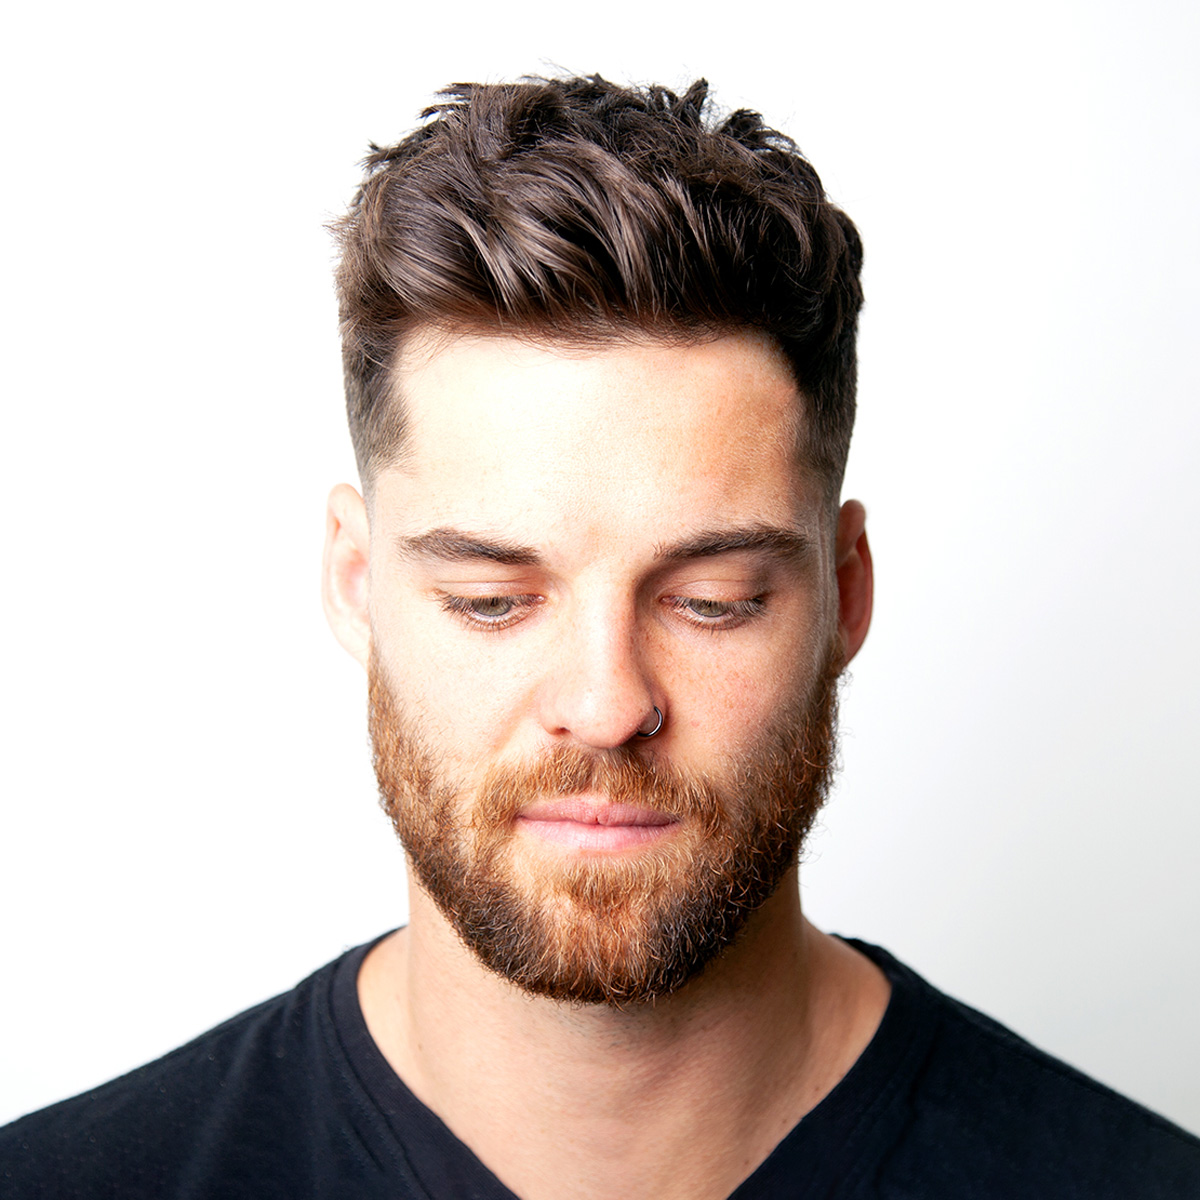 Checkout 30 Best Low-Fade Haircuts Idea for Young Guys